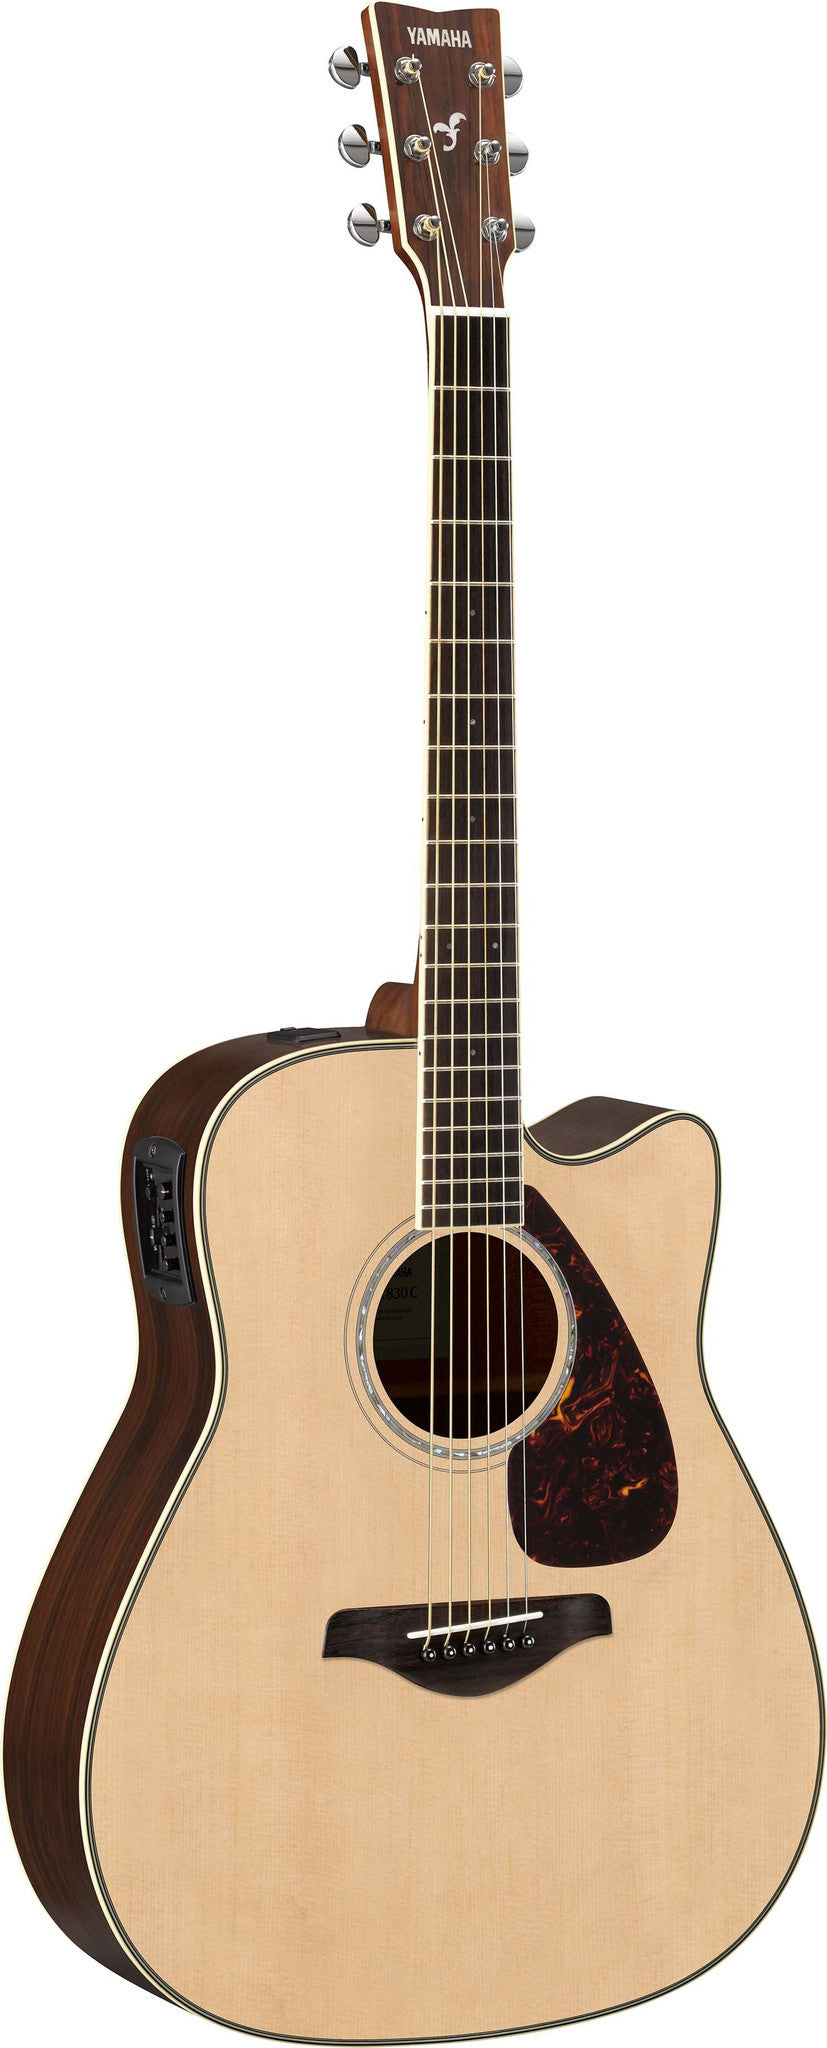 Yamaha FGX830C Acoustic Electric Dreadnought Guitar